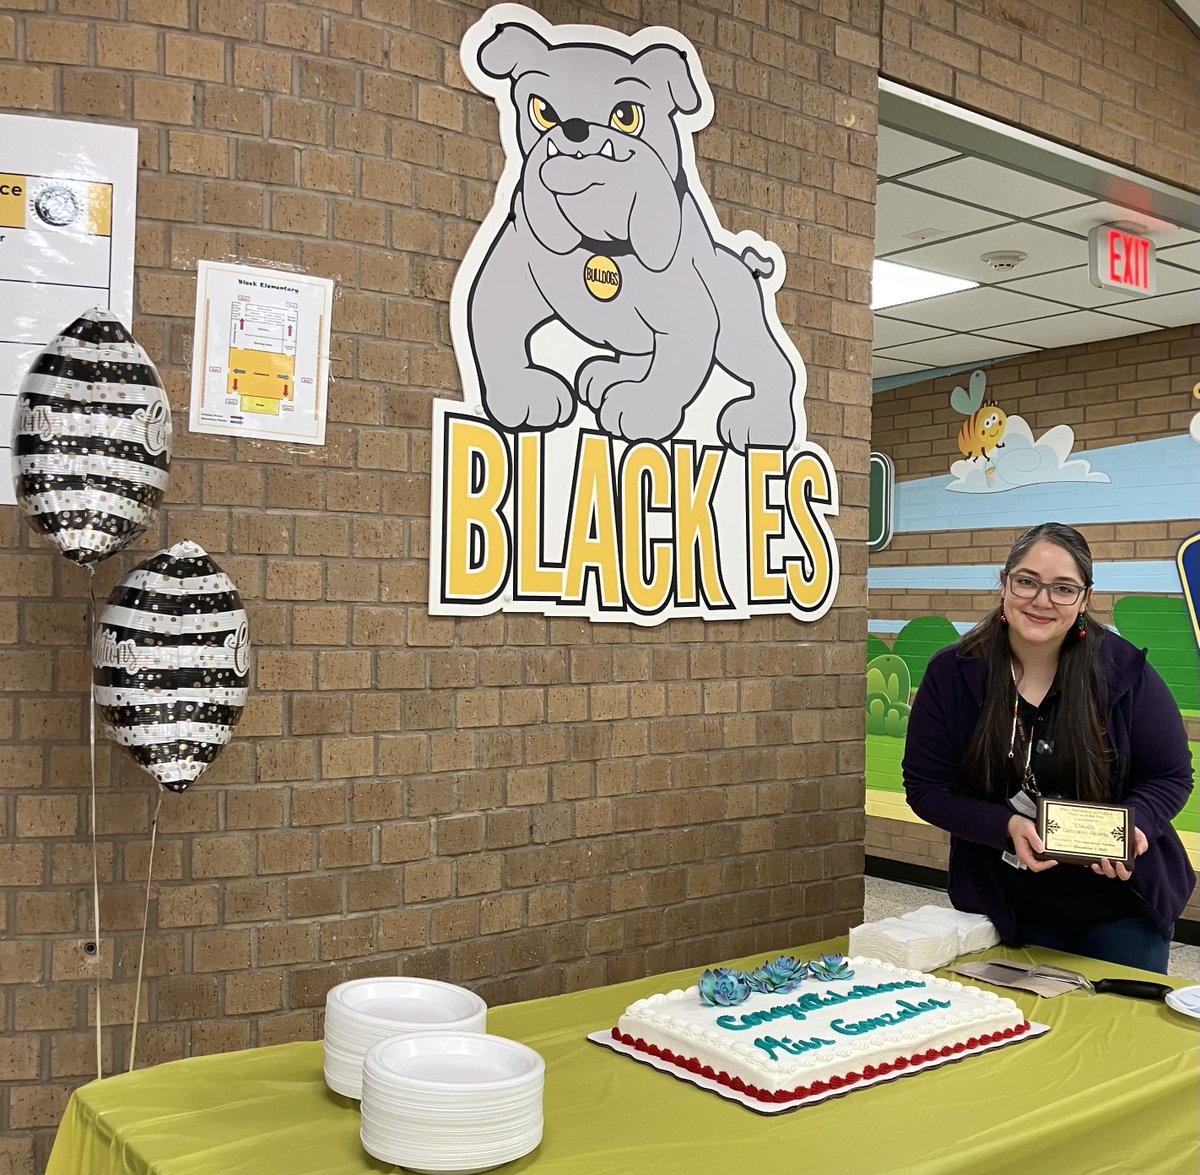 Congratulations to our TOY @BlackES_AISD Claudia Gonzalez @LilianGoal! Thank you for your dedication and servicing our students with excellence.
@nparedes2000 @A_Hart73